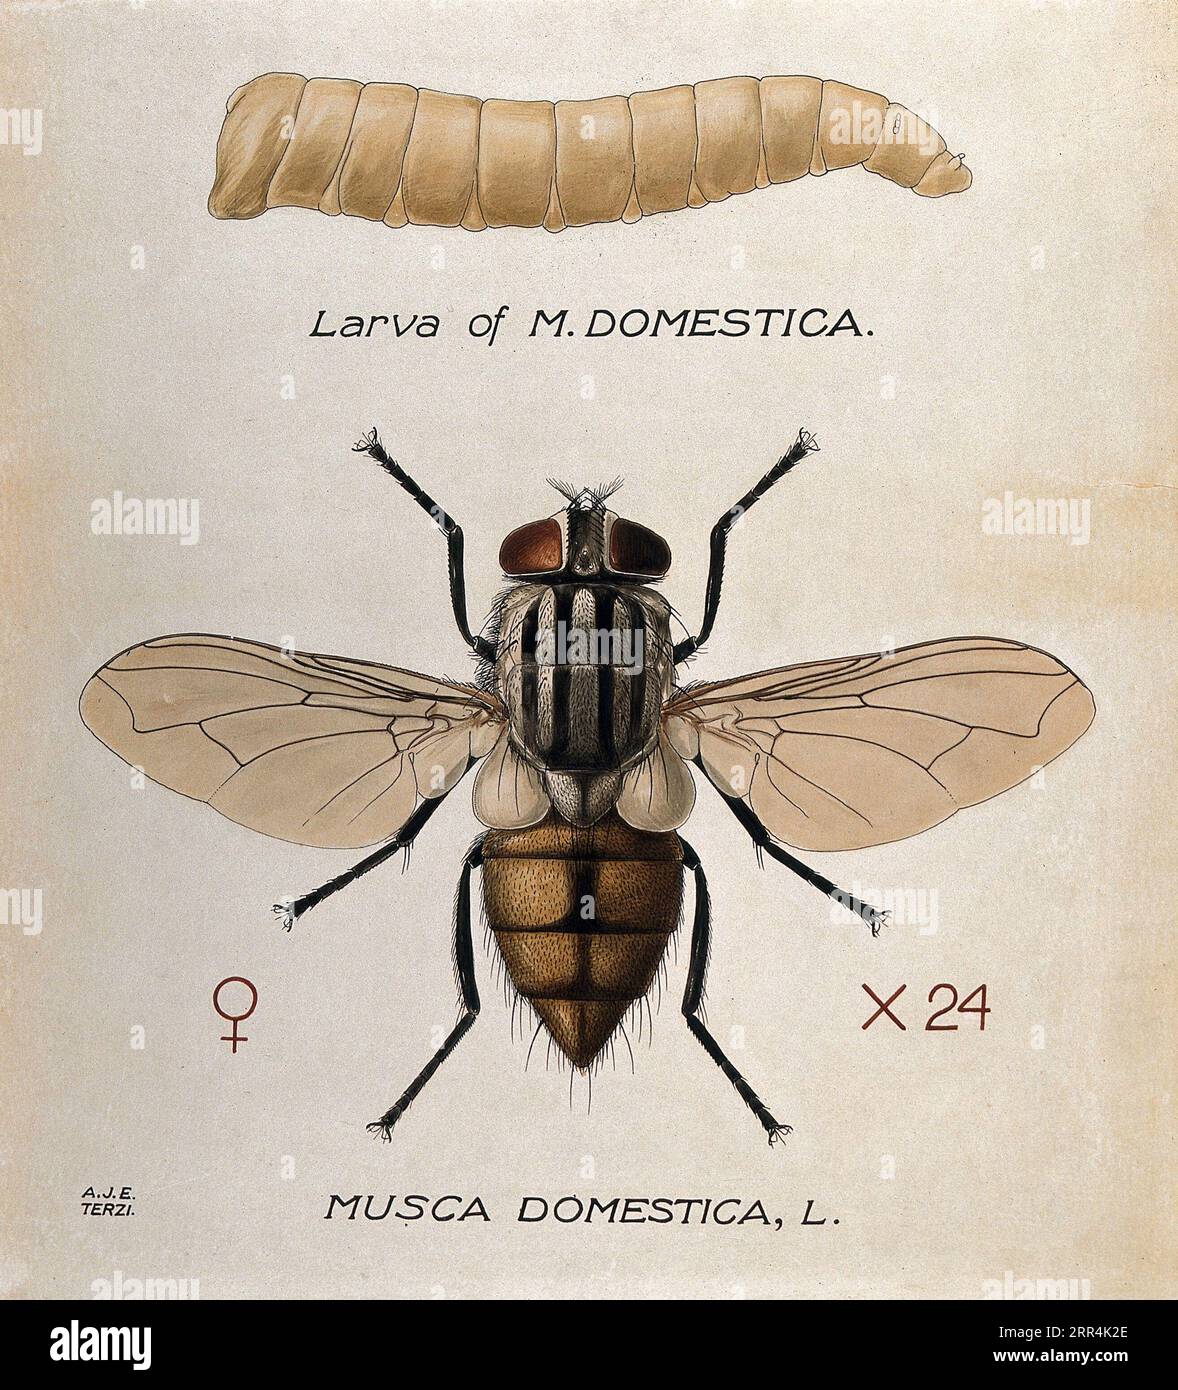 The Larva and fly of a house fly (Musca domestica), coloured drawing by A.J.E. Terzi. Stock Photo